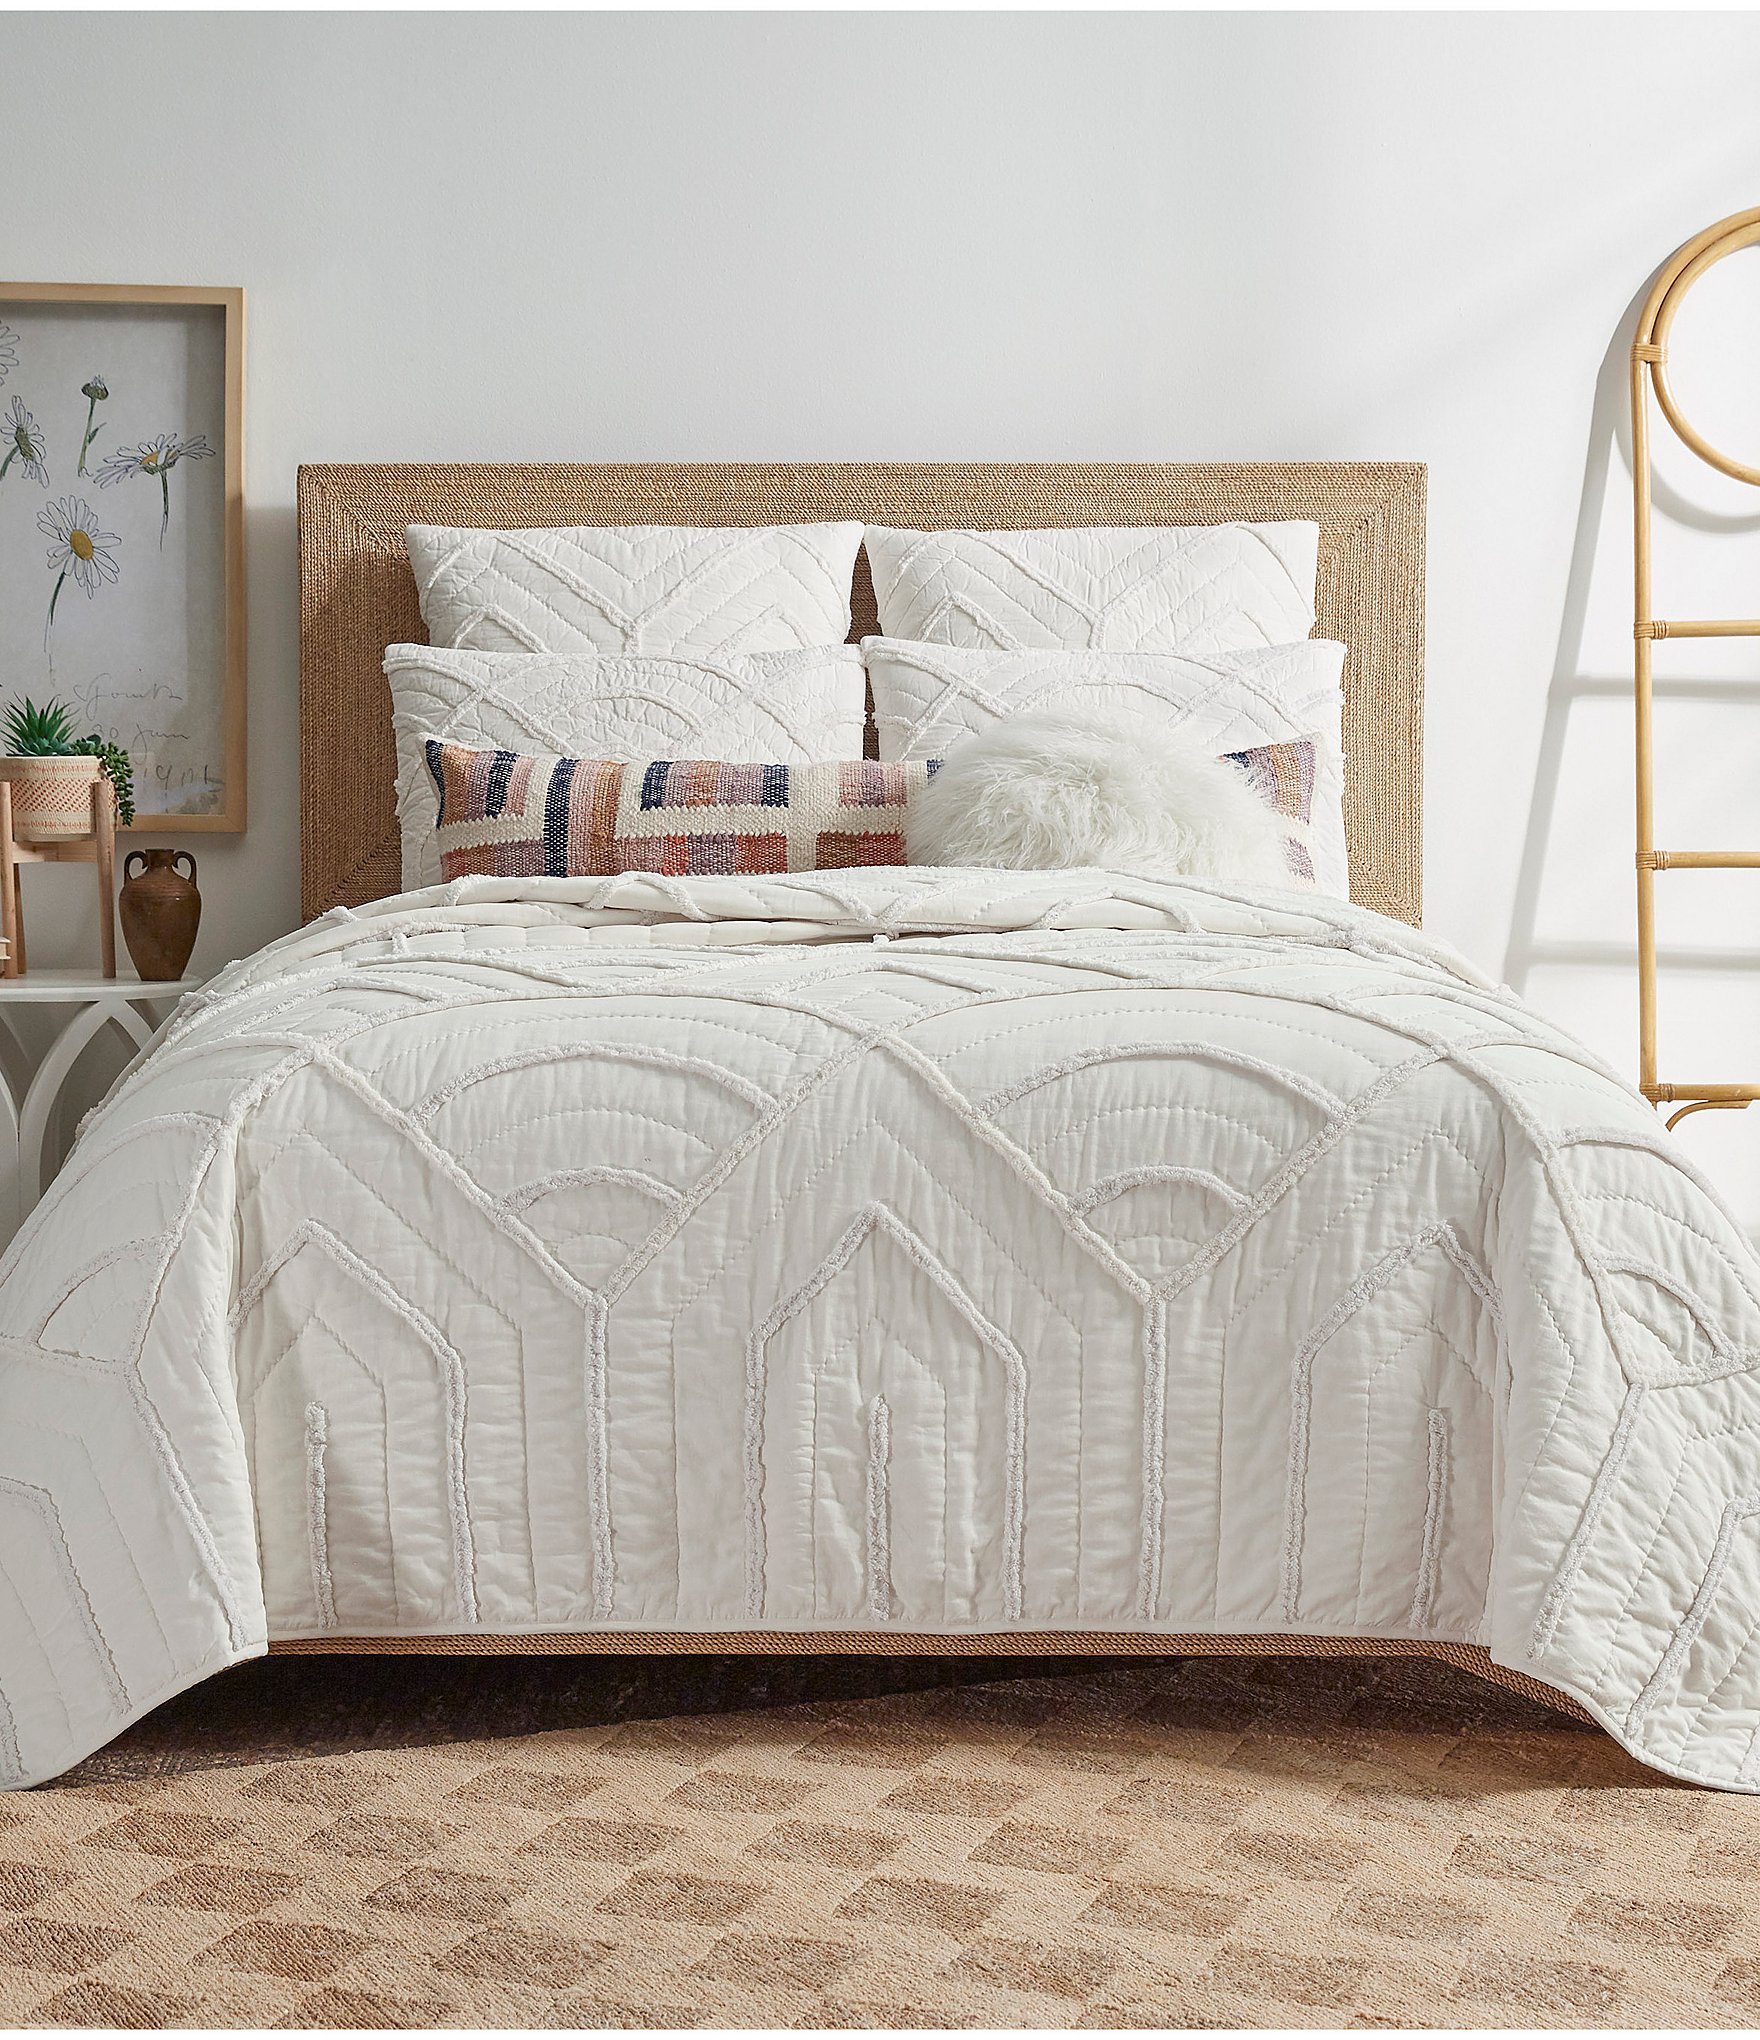 Ivory Bedding Collections, Comforters, Quilts, Duvets & Sheets | Dillard's